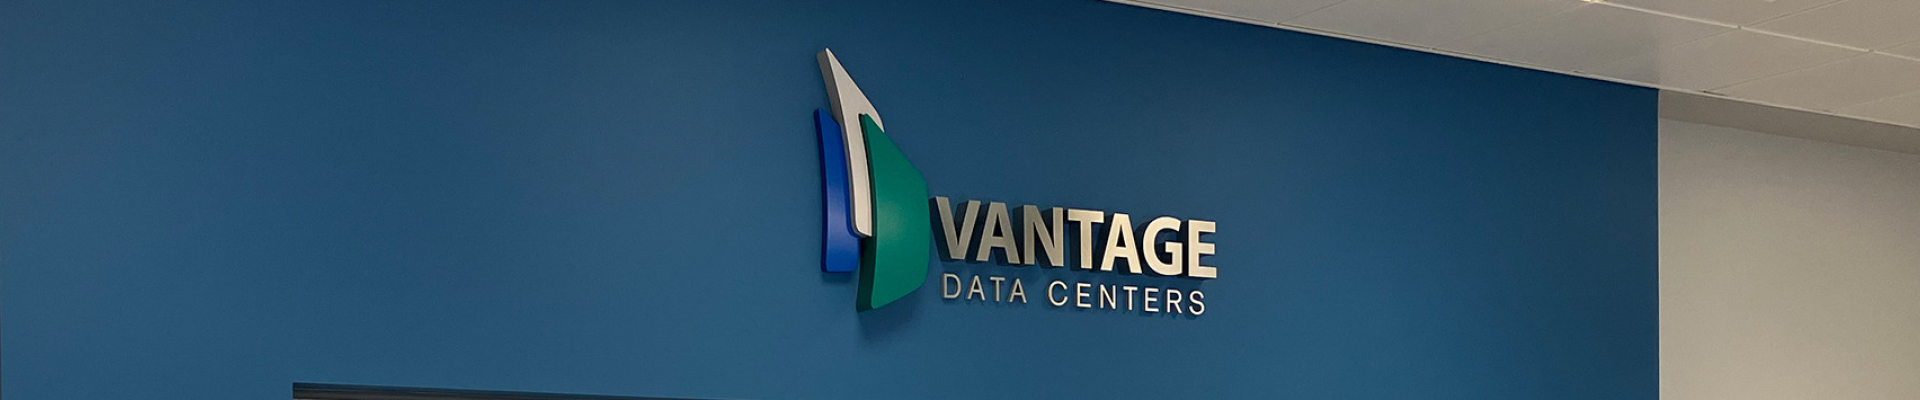 Global brand implementation project for Vantage by Pearce Signs